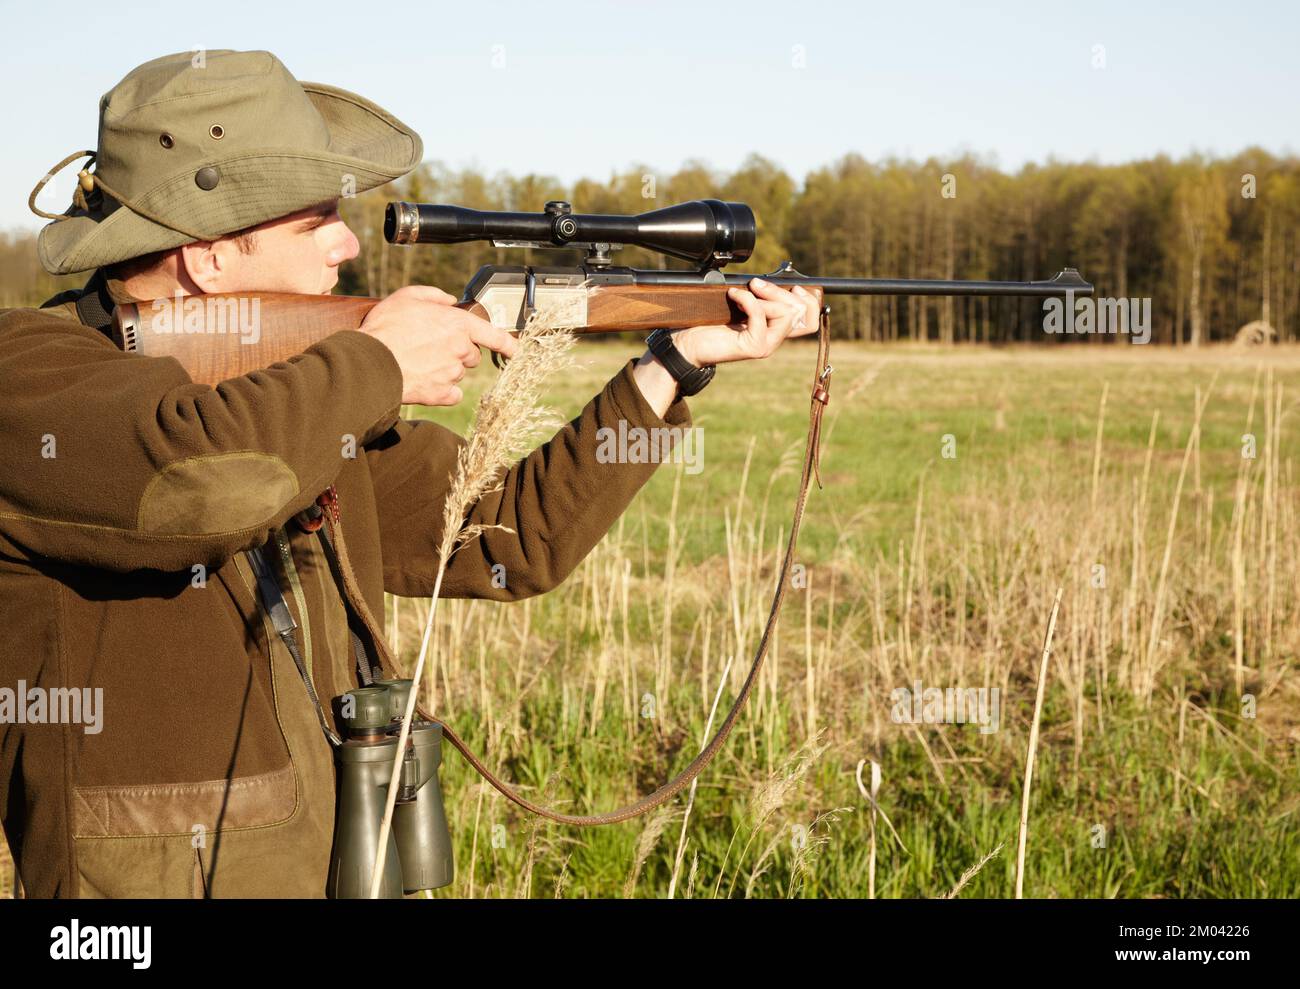 Making sure I get the right shot. A game ranger in the outdoors aiming with his sniper rifle. Stock Photo